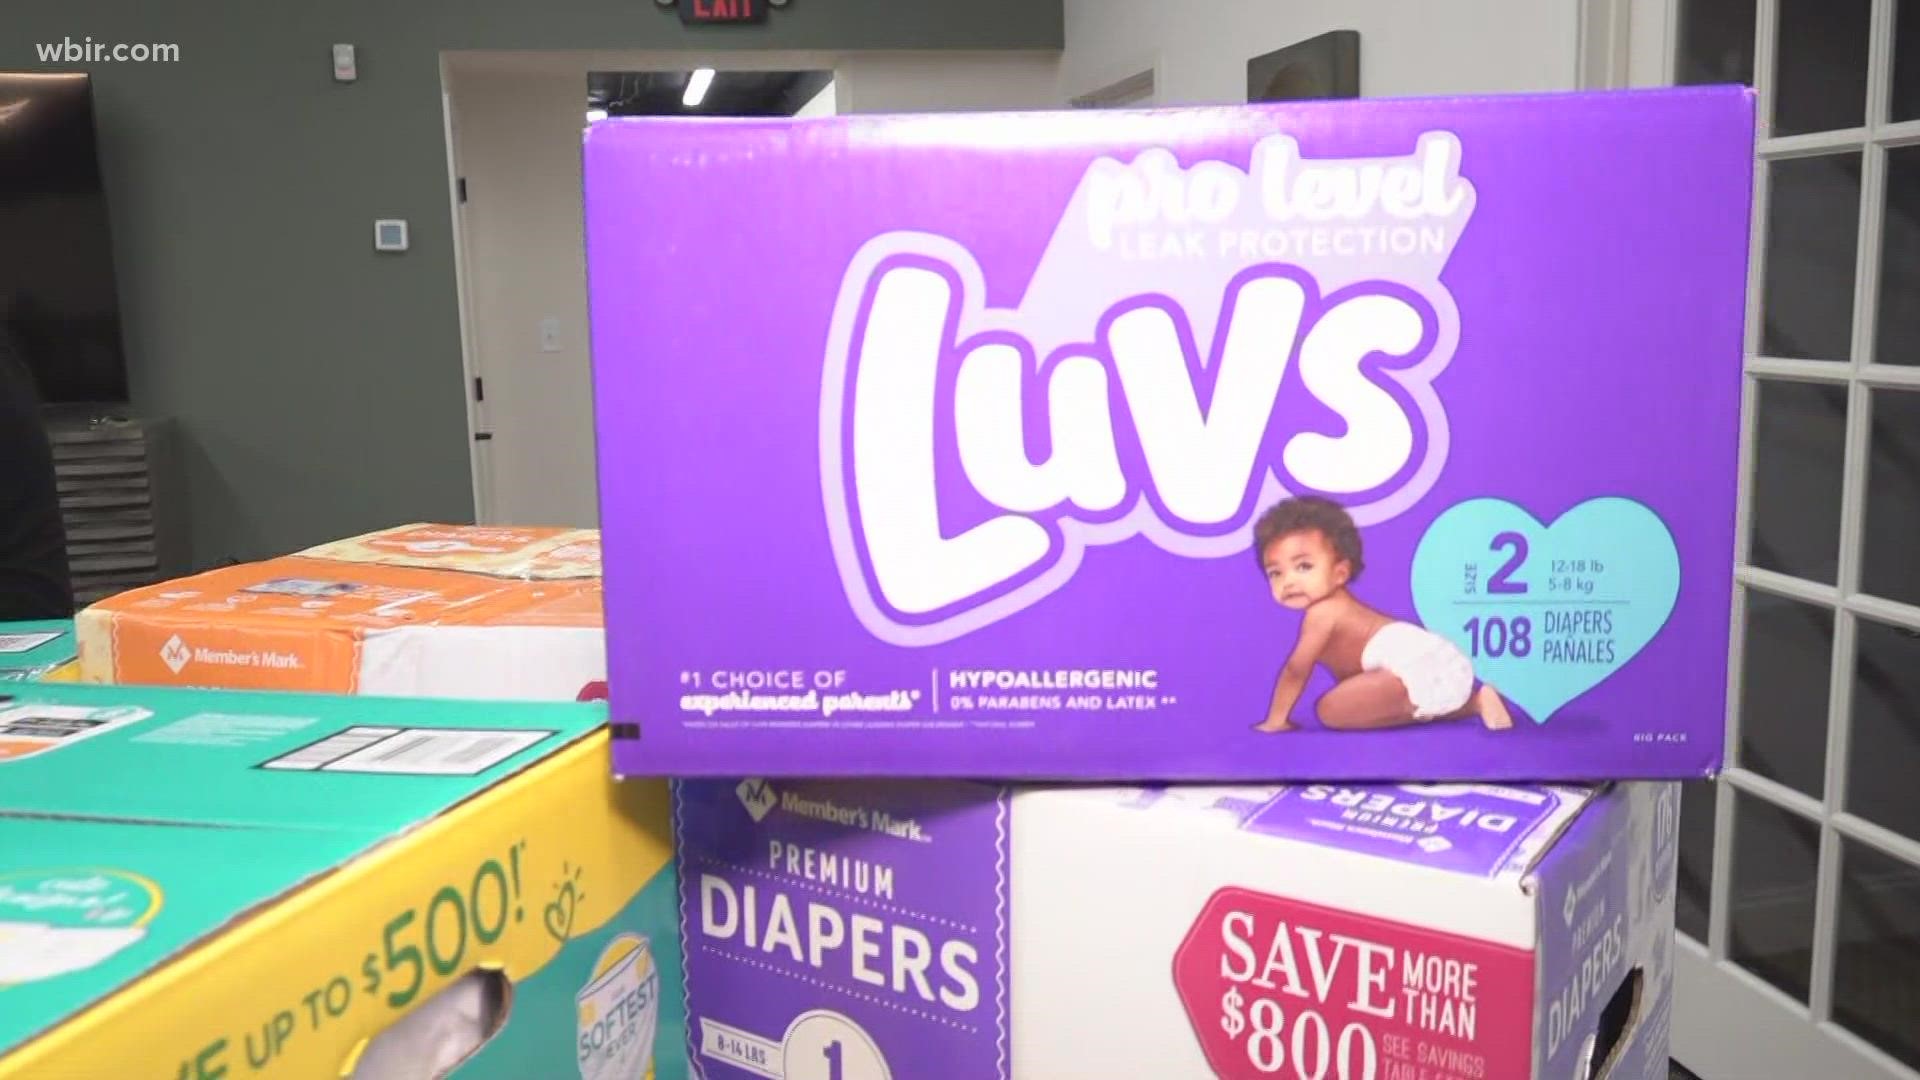 The diaper drive will benefit the East Tennessee Children's Hospital.